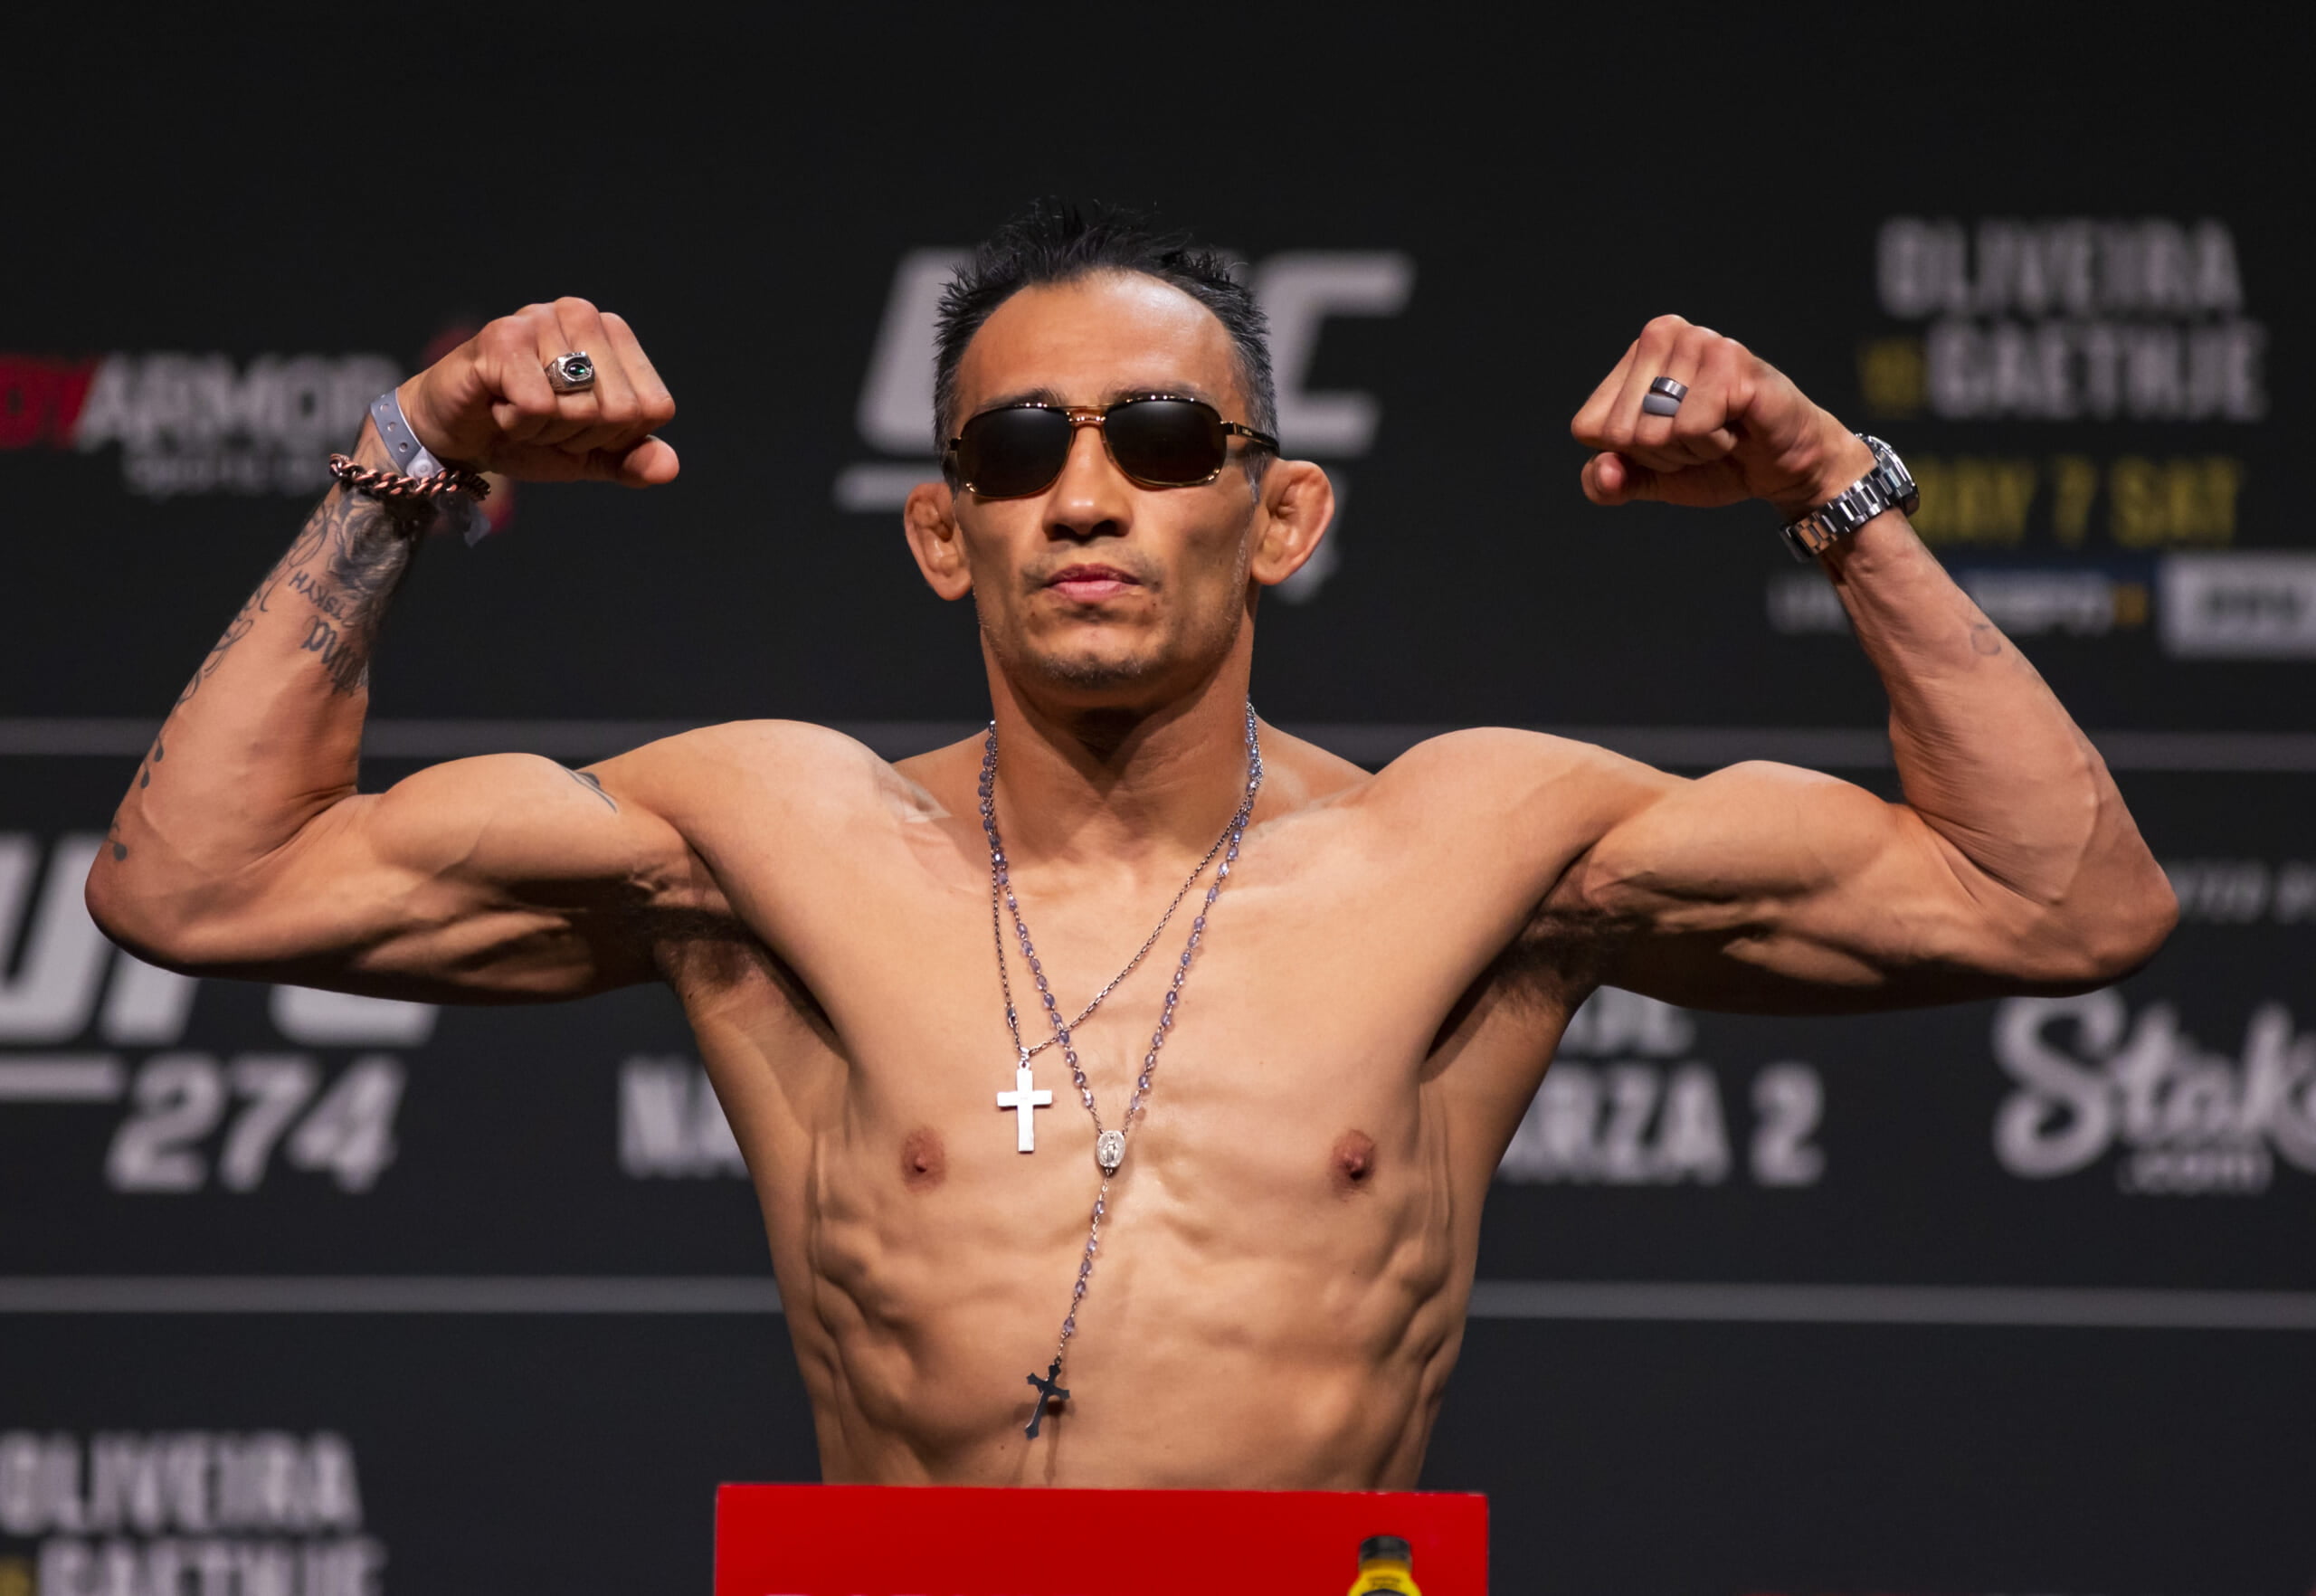 UFC 274 loss wouldn't lead to Tony Ferguson being cut, says boss Dana White